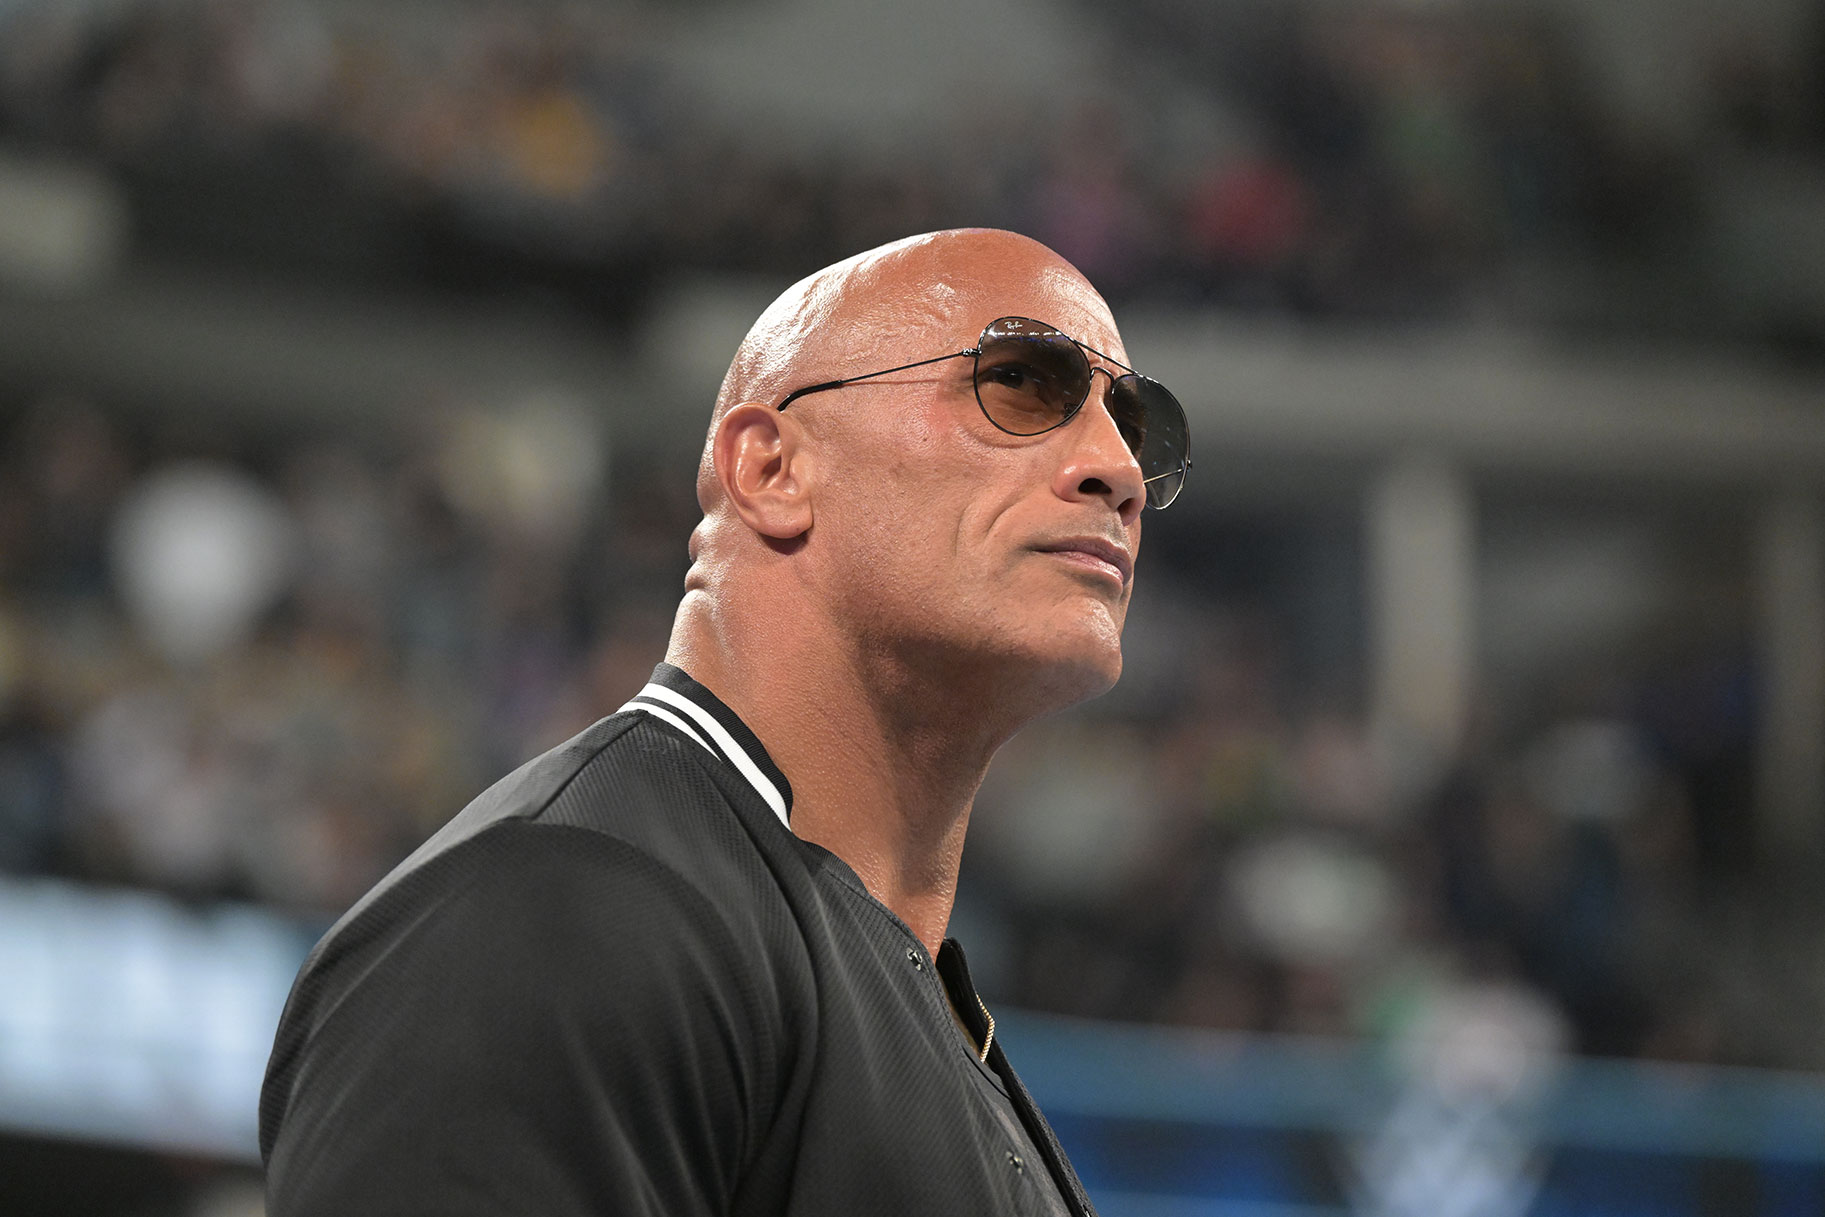 Close up of The Rock as he stands in the ring